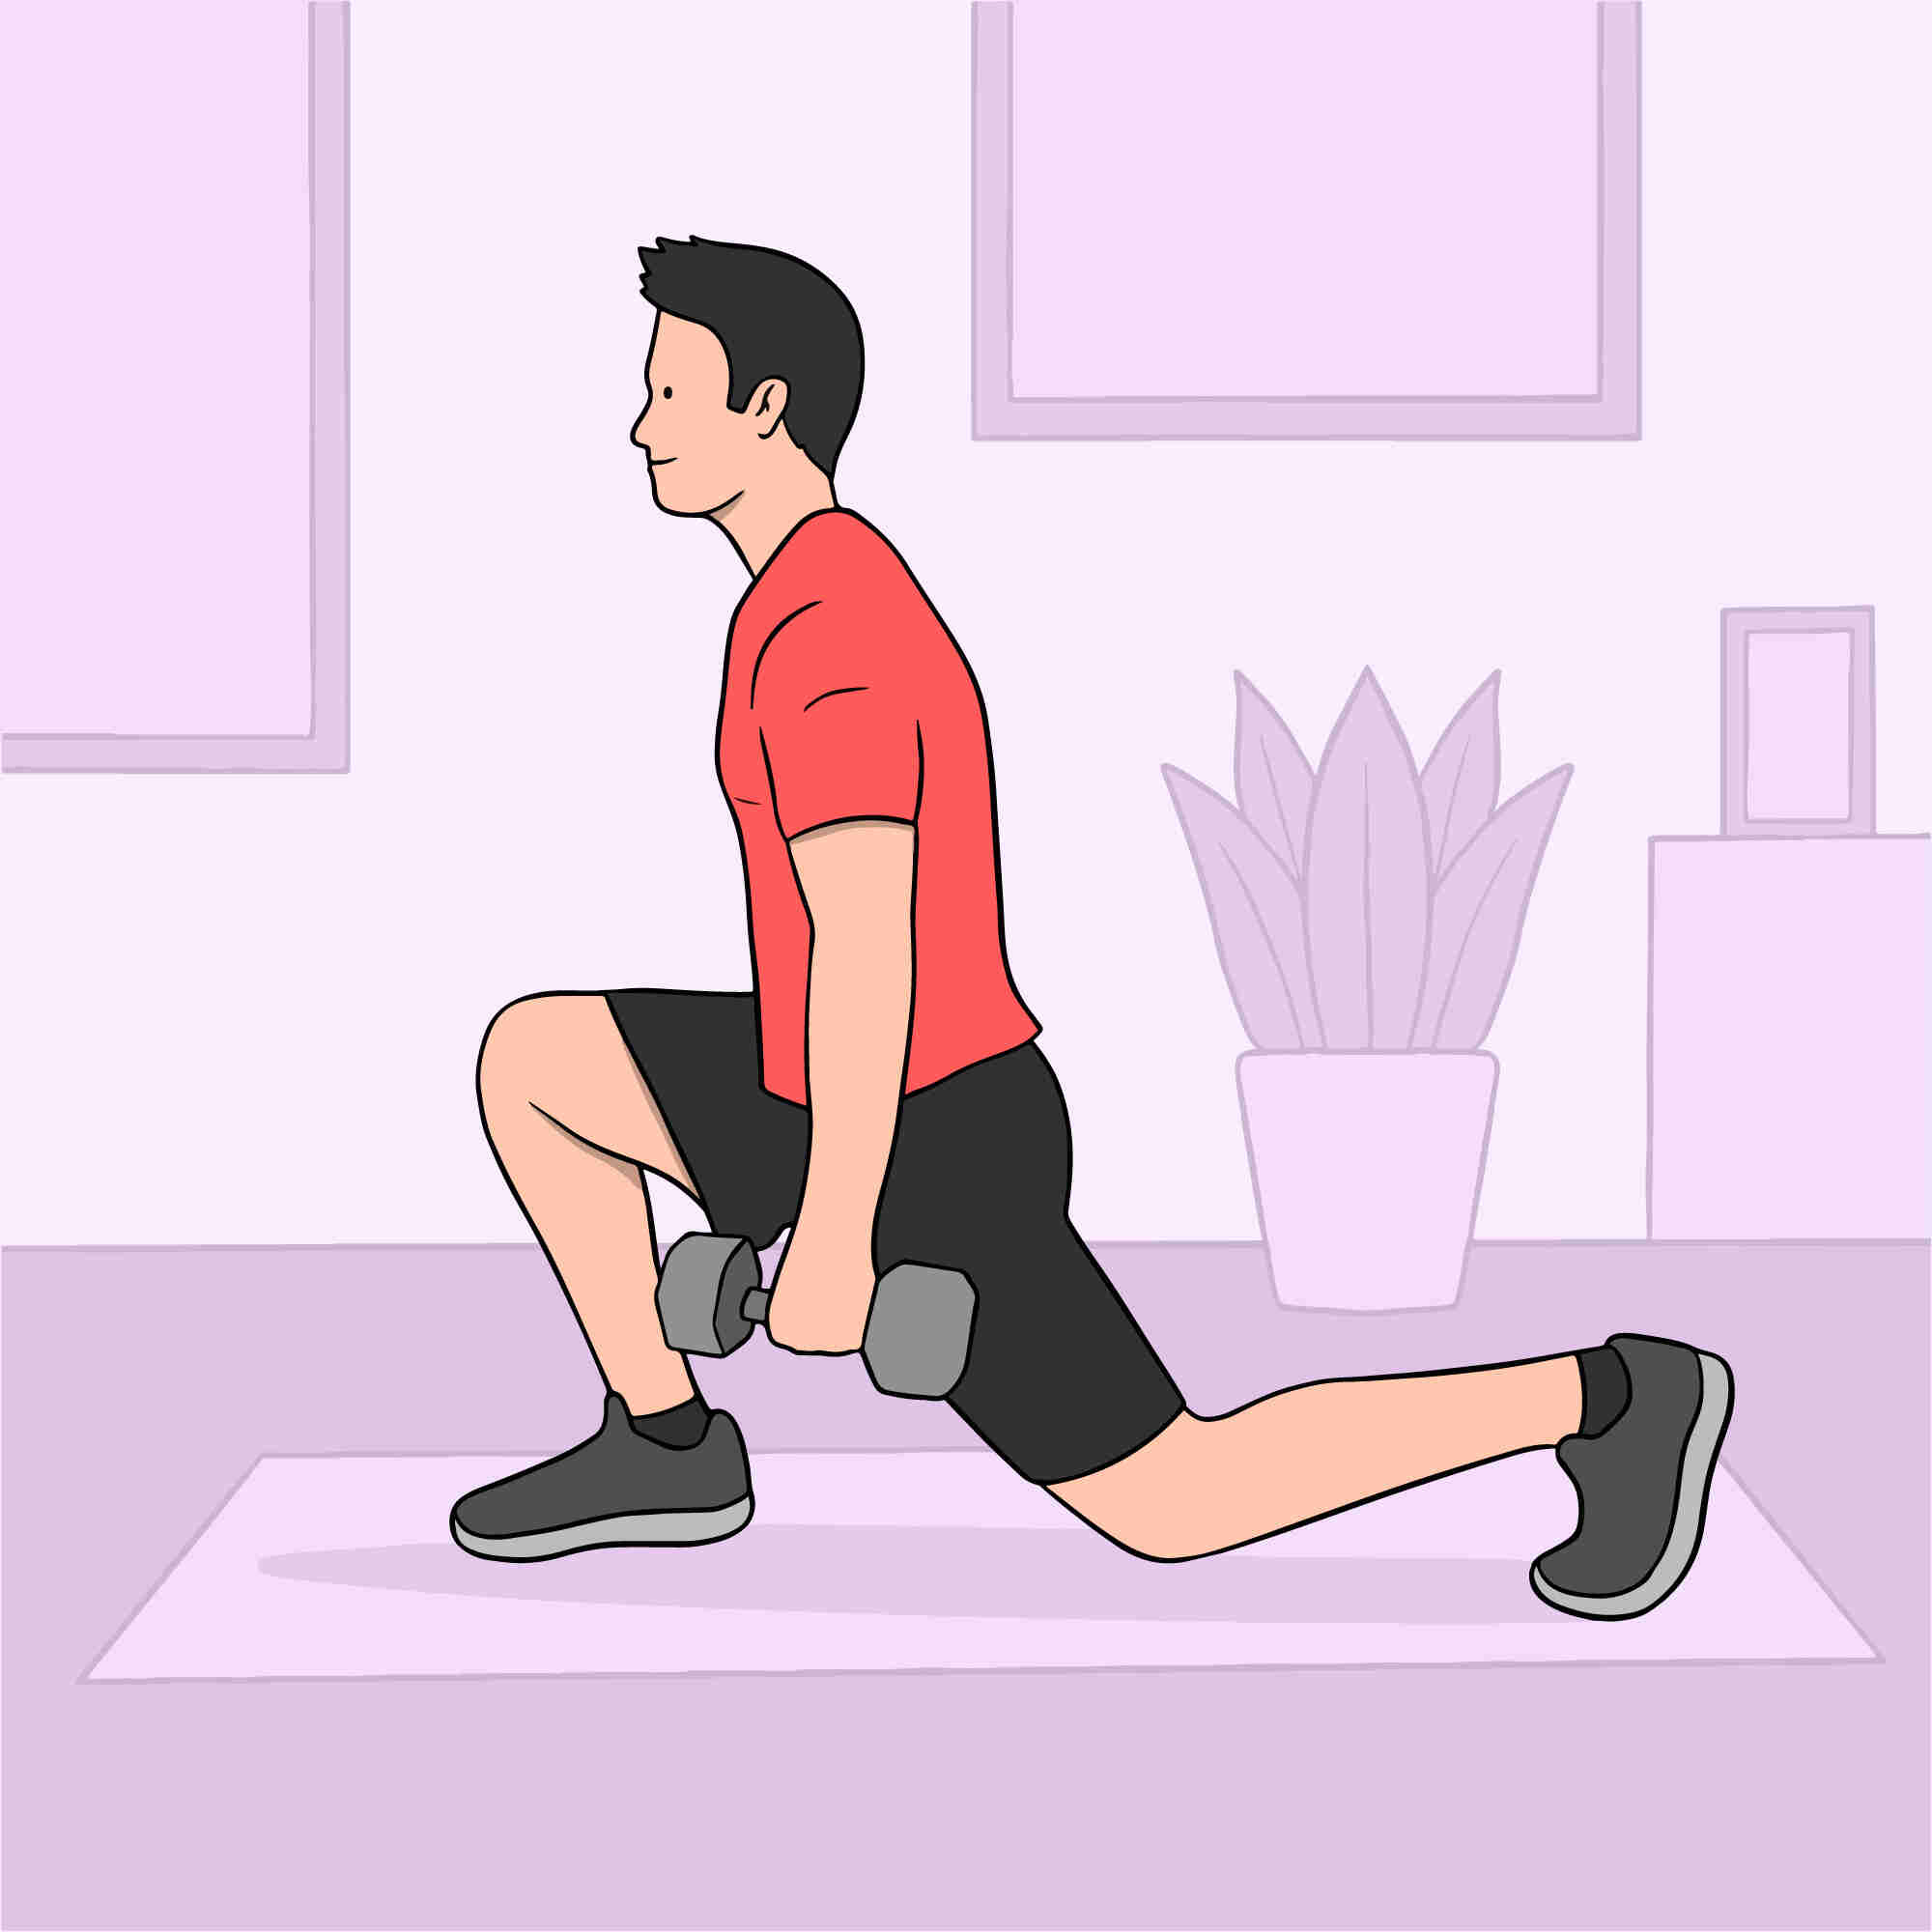 Lunges exercise is important to include in your lean muscle workout program